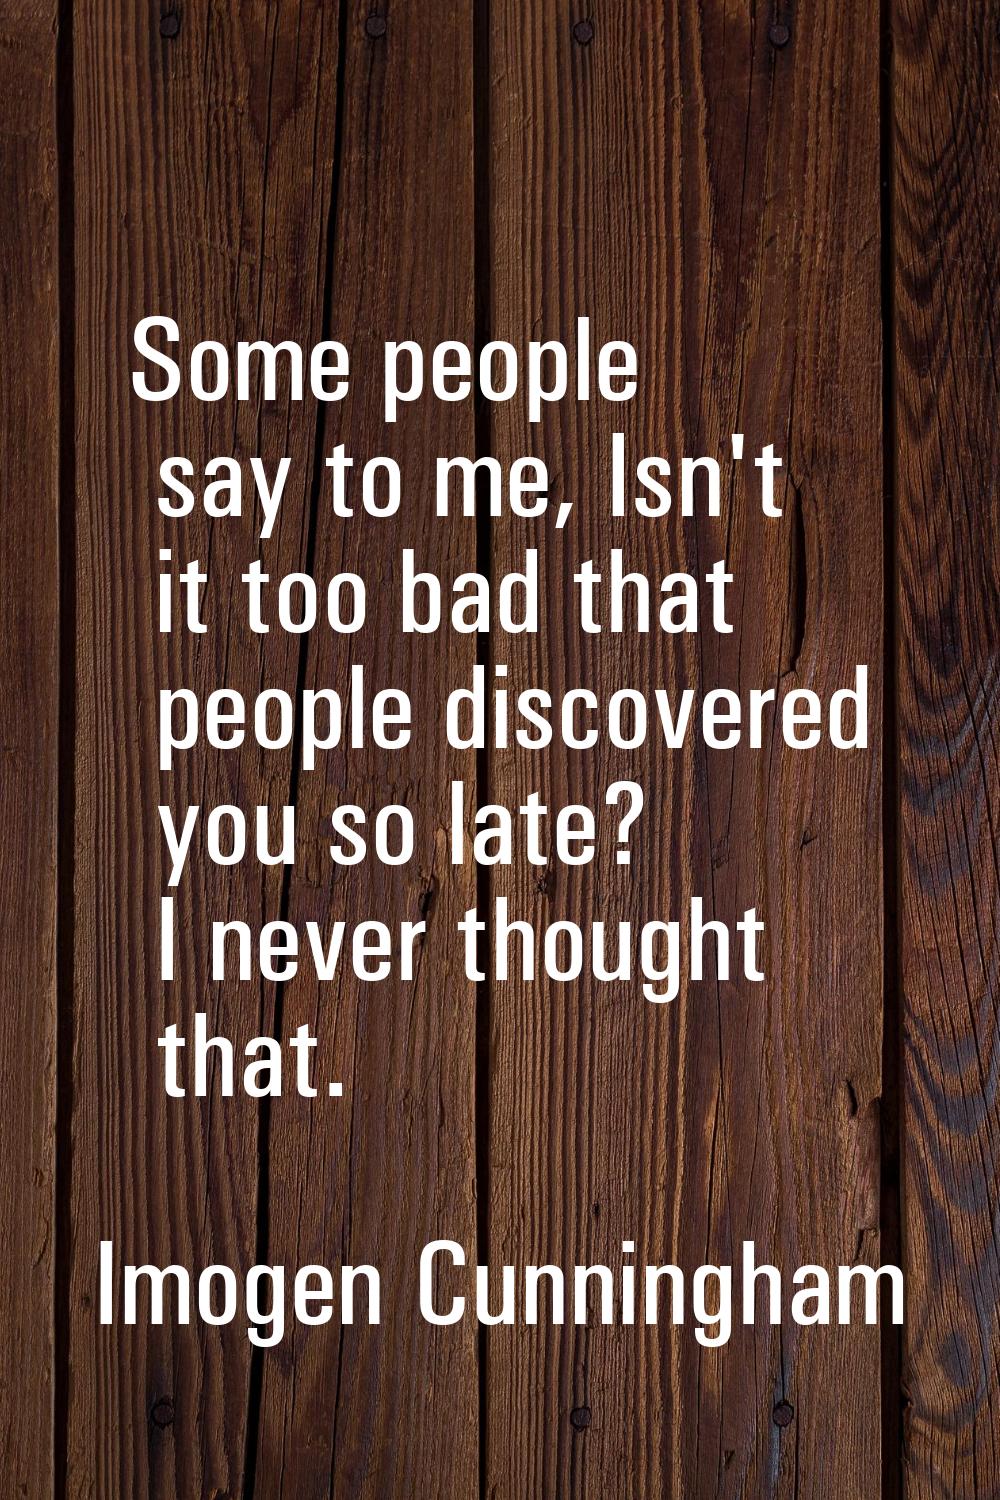 Some people say to me, Isn't it too bad that people discovered you so late? I never thought that.